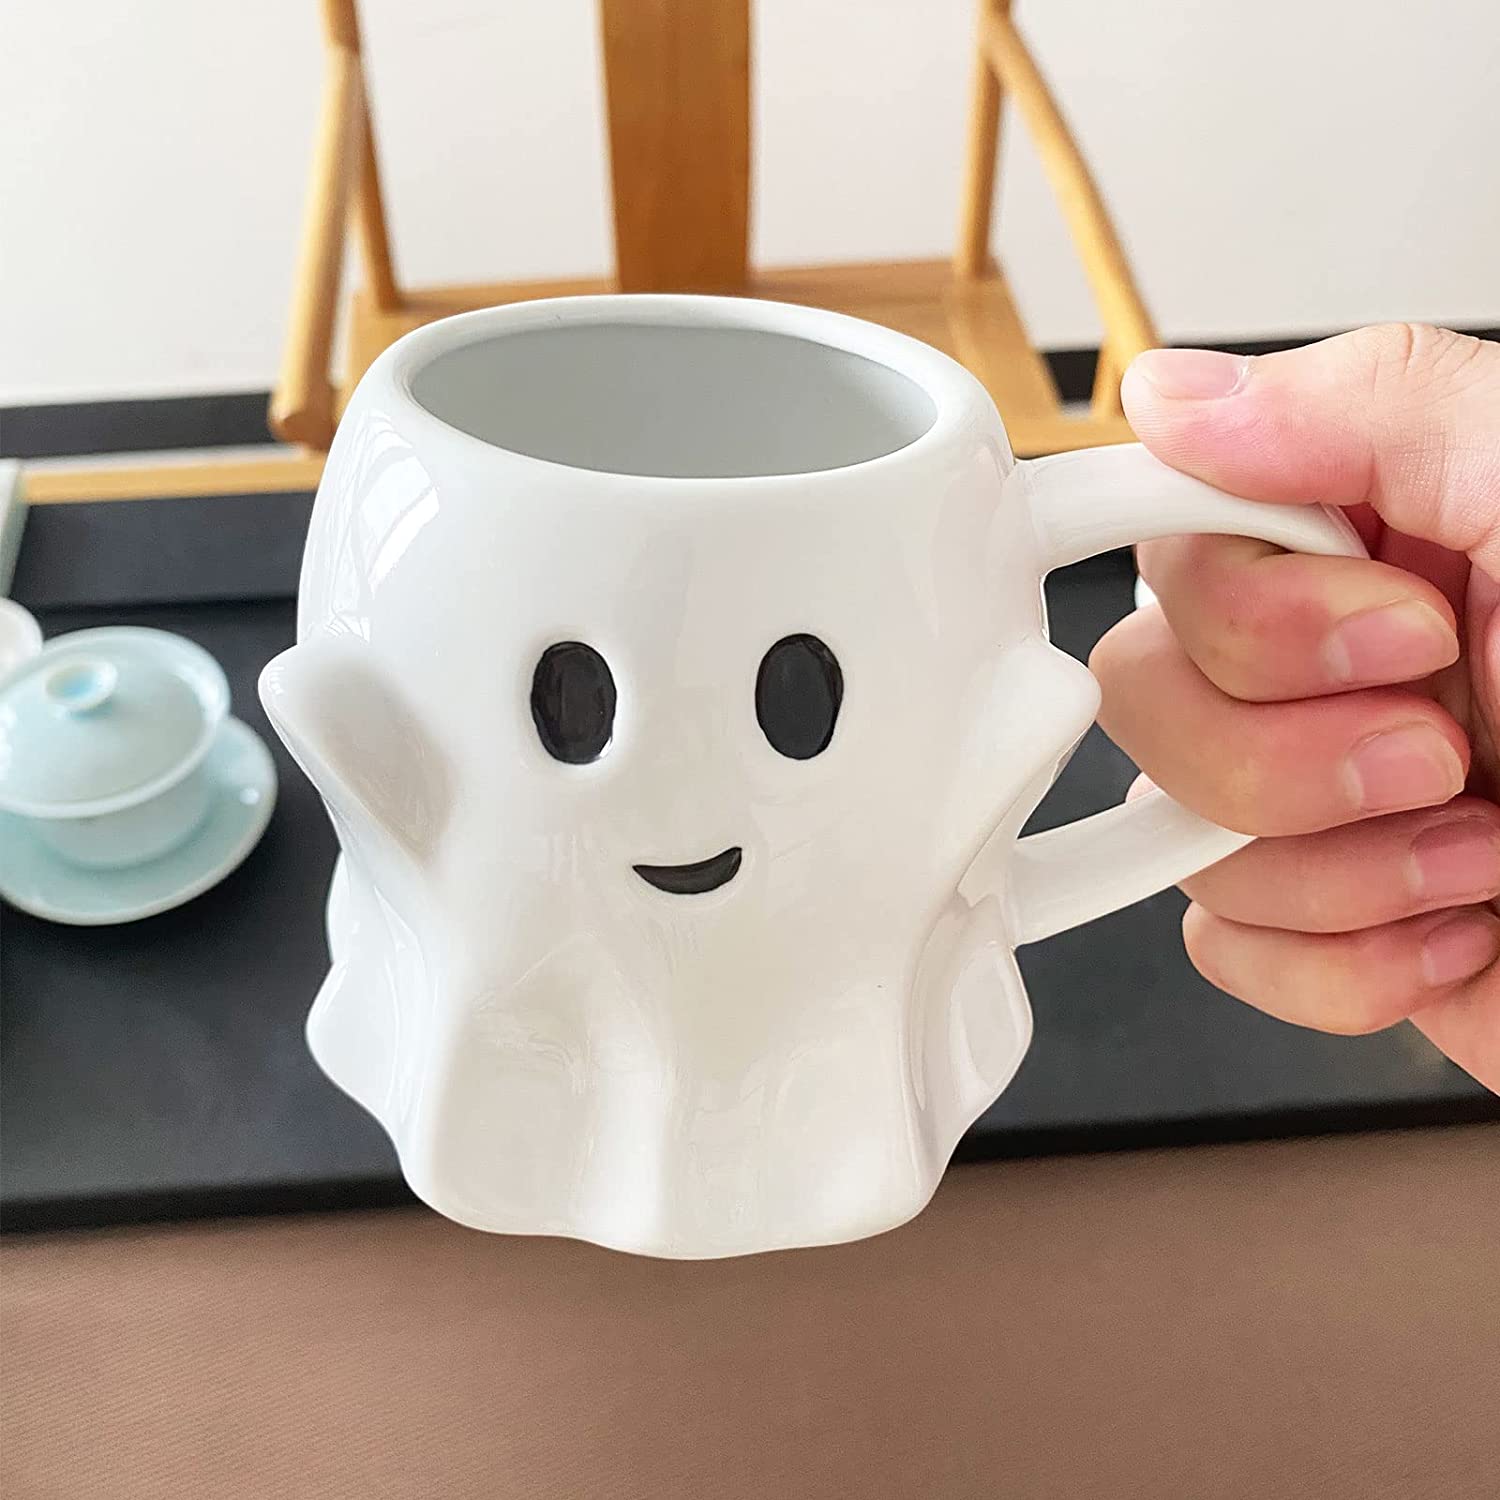 These cute ghost shaped coffee mugs are seriously supernatural ...